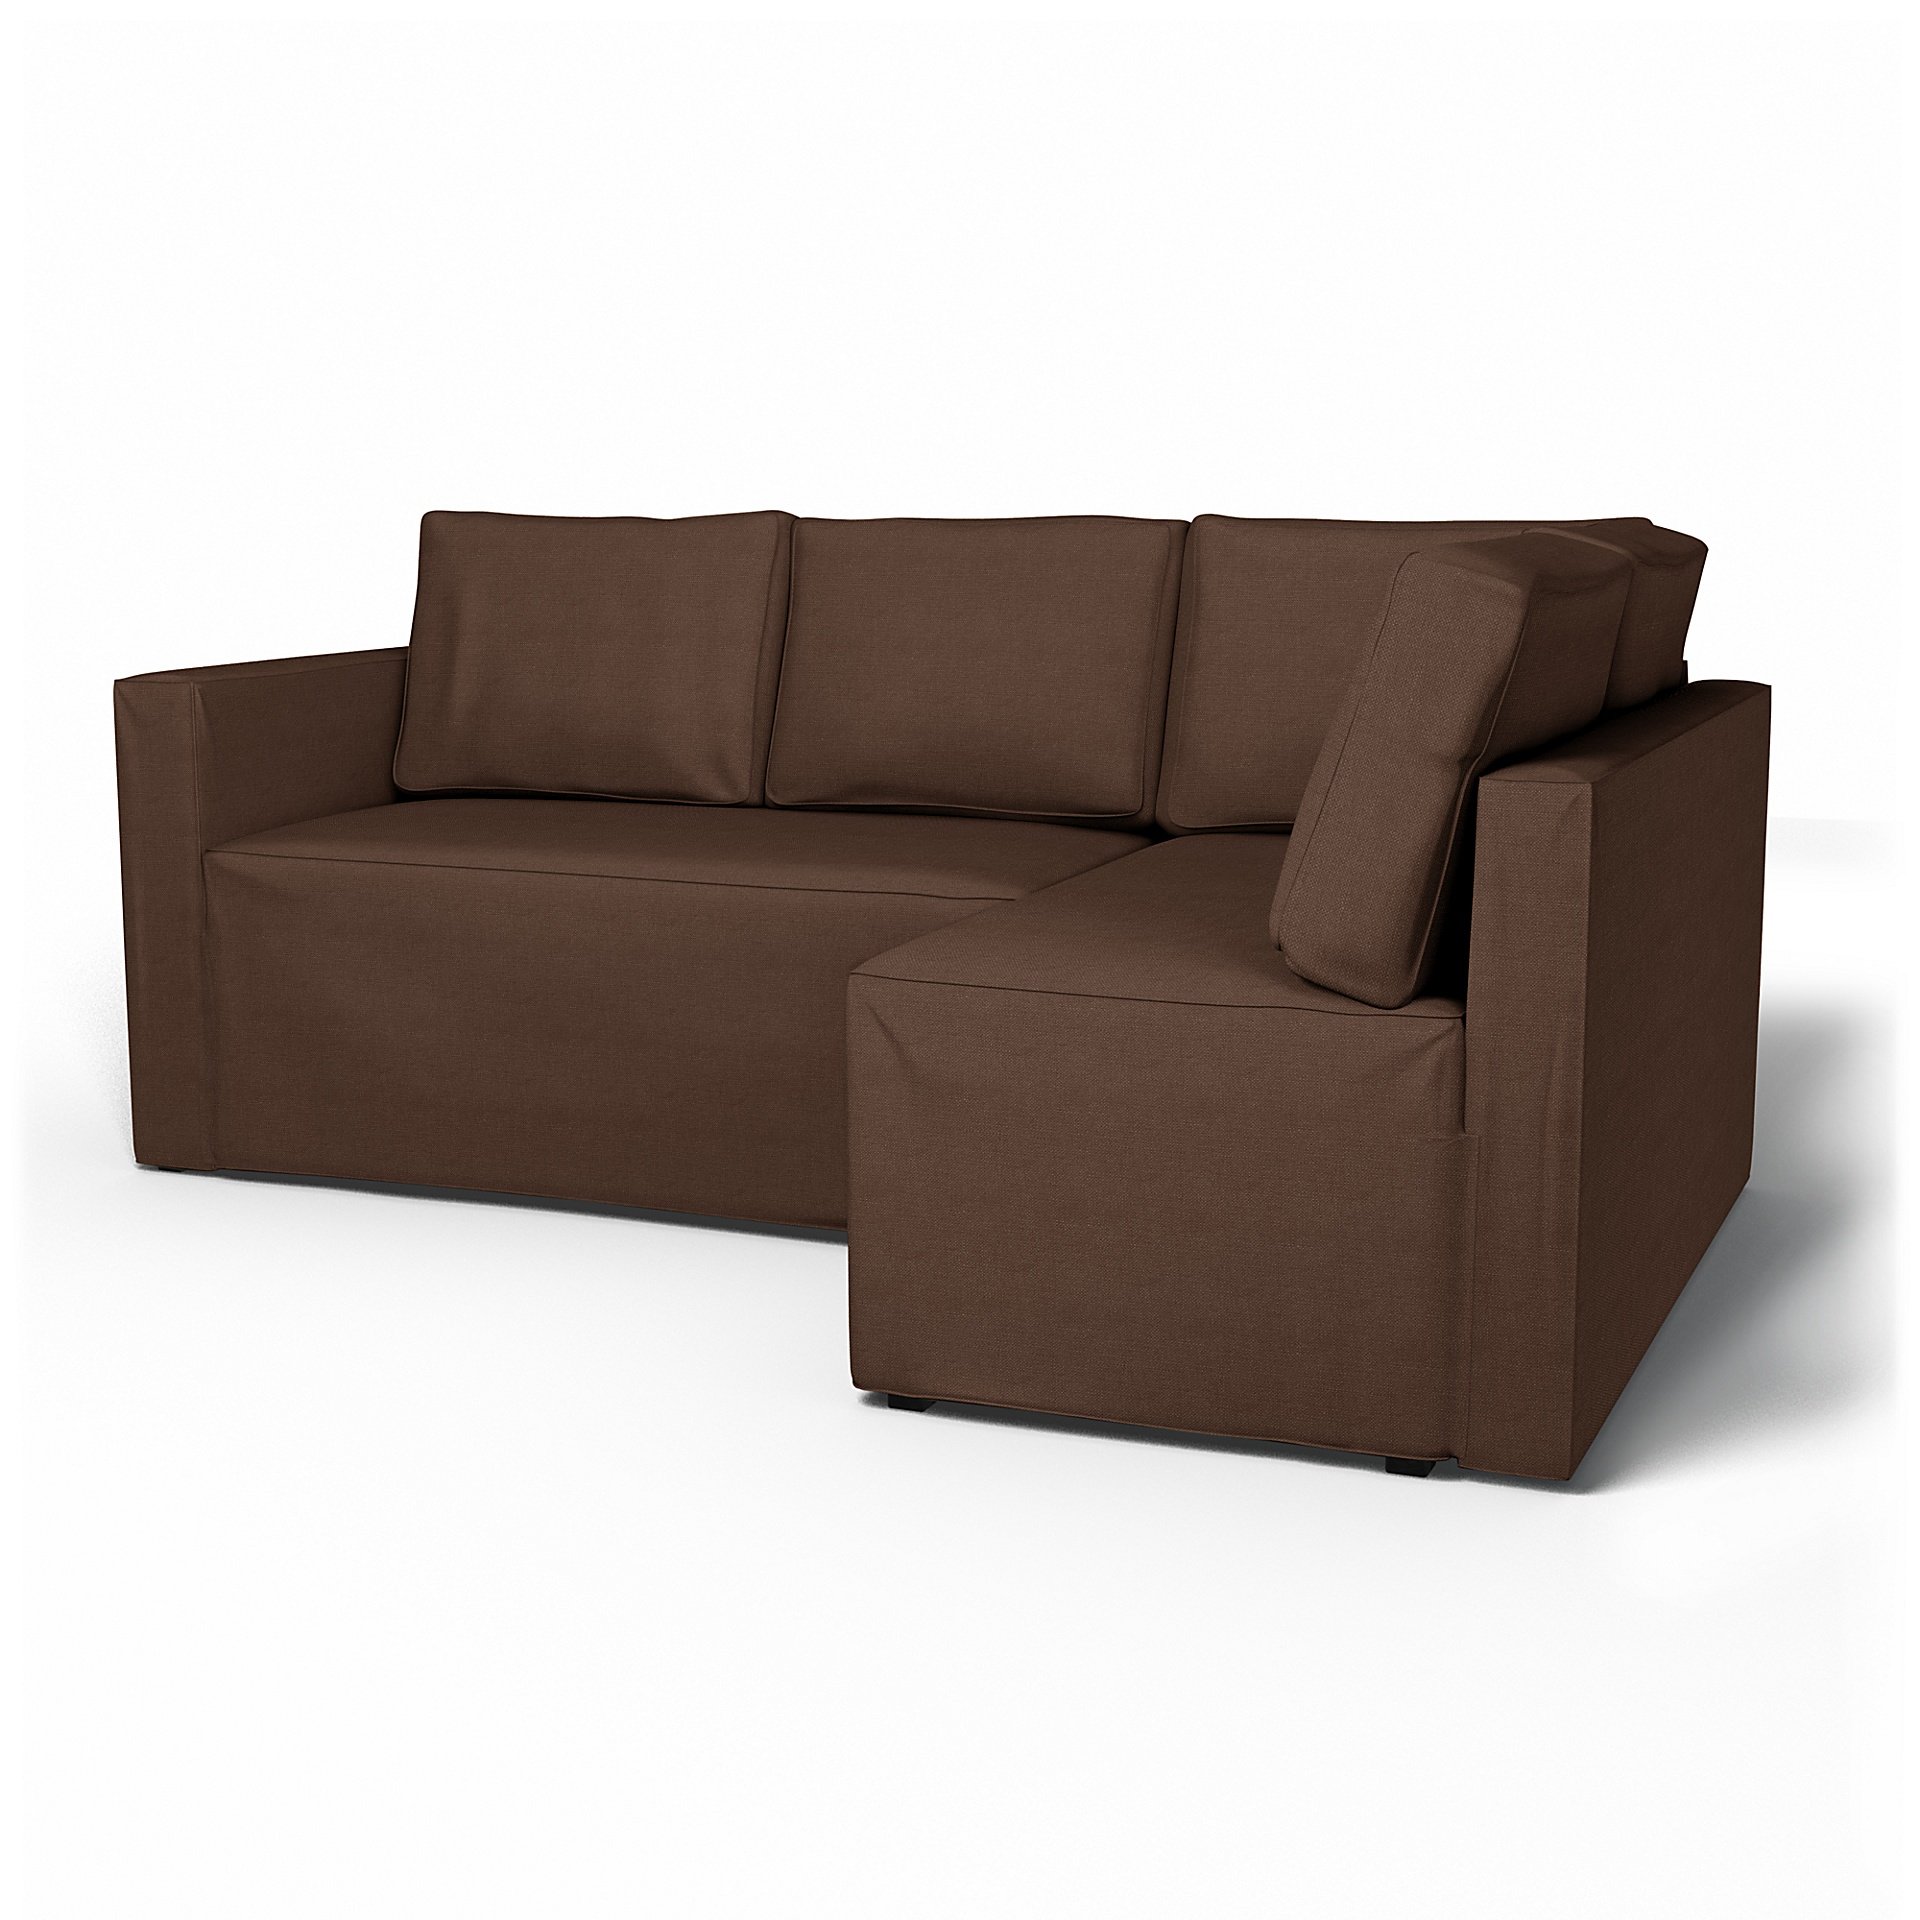 IKEA - Fagelbo Sofa Bed with Right Chaise Cover, Chocolate, Linen - Bemz